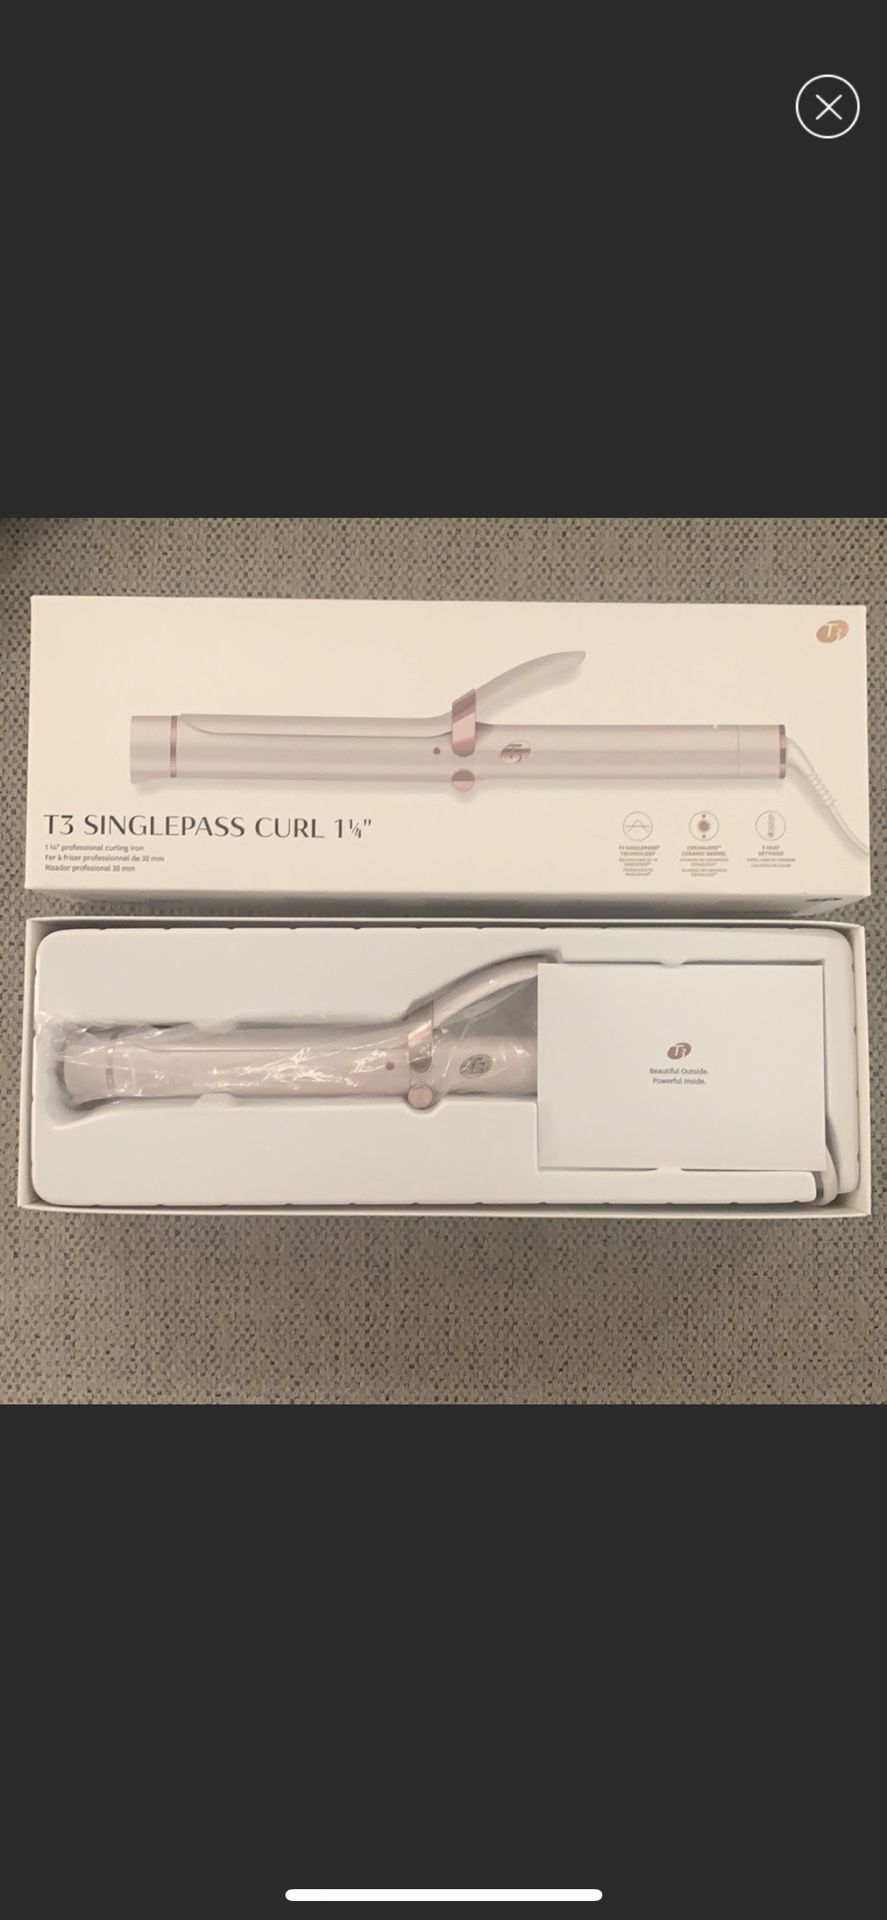 T3 Curling Iron